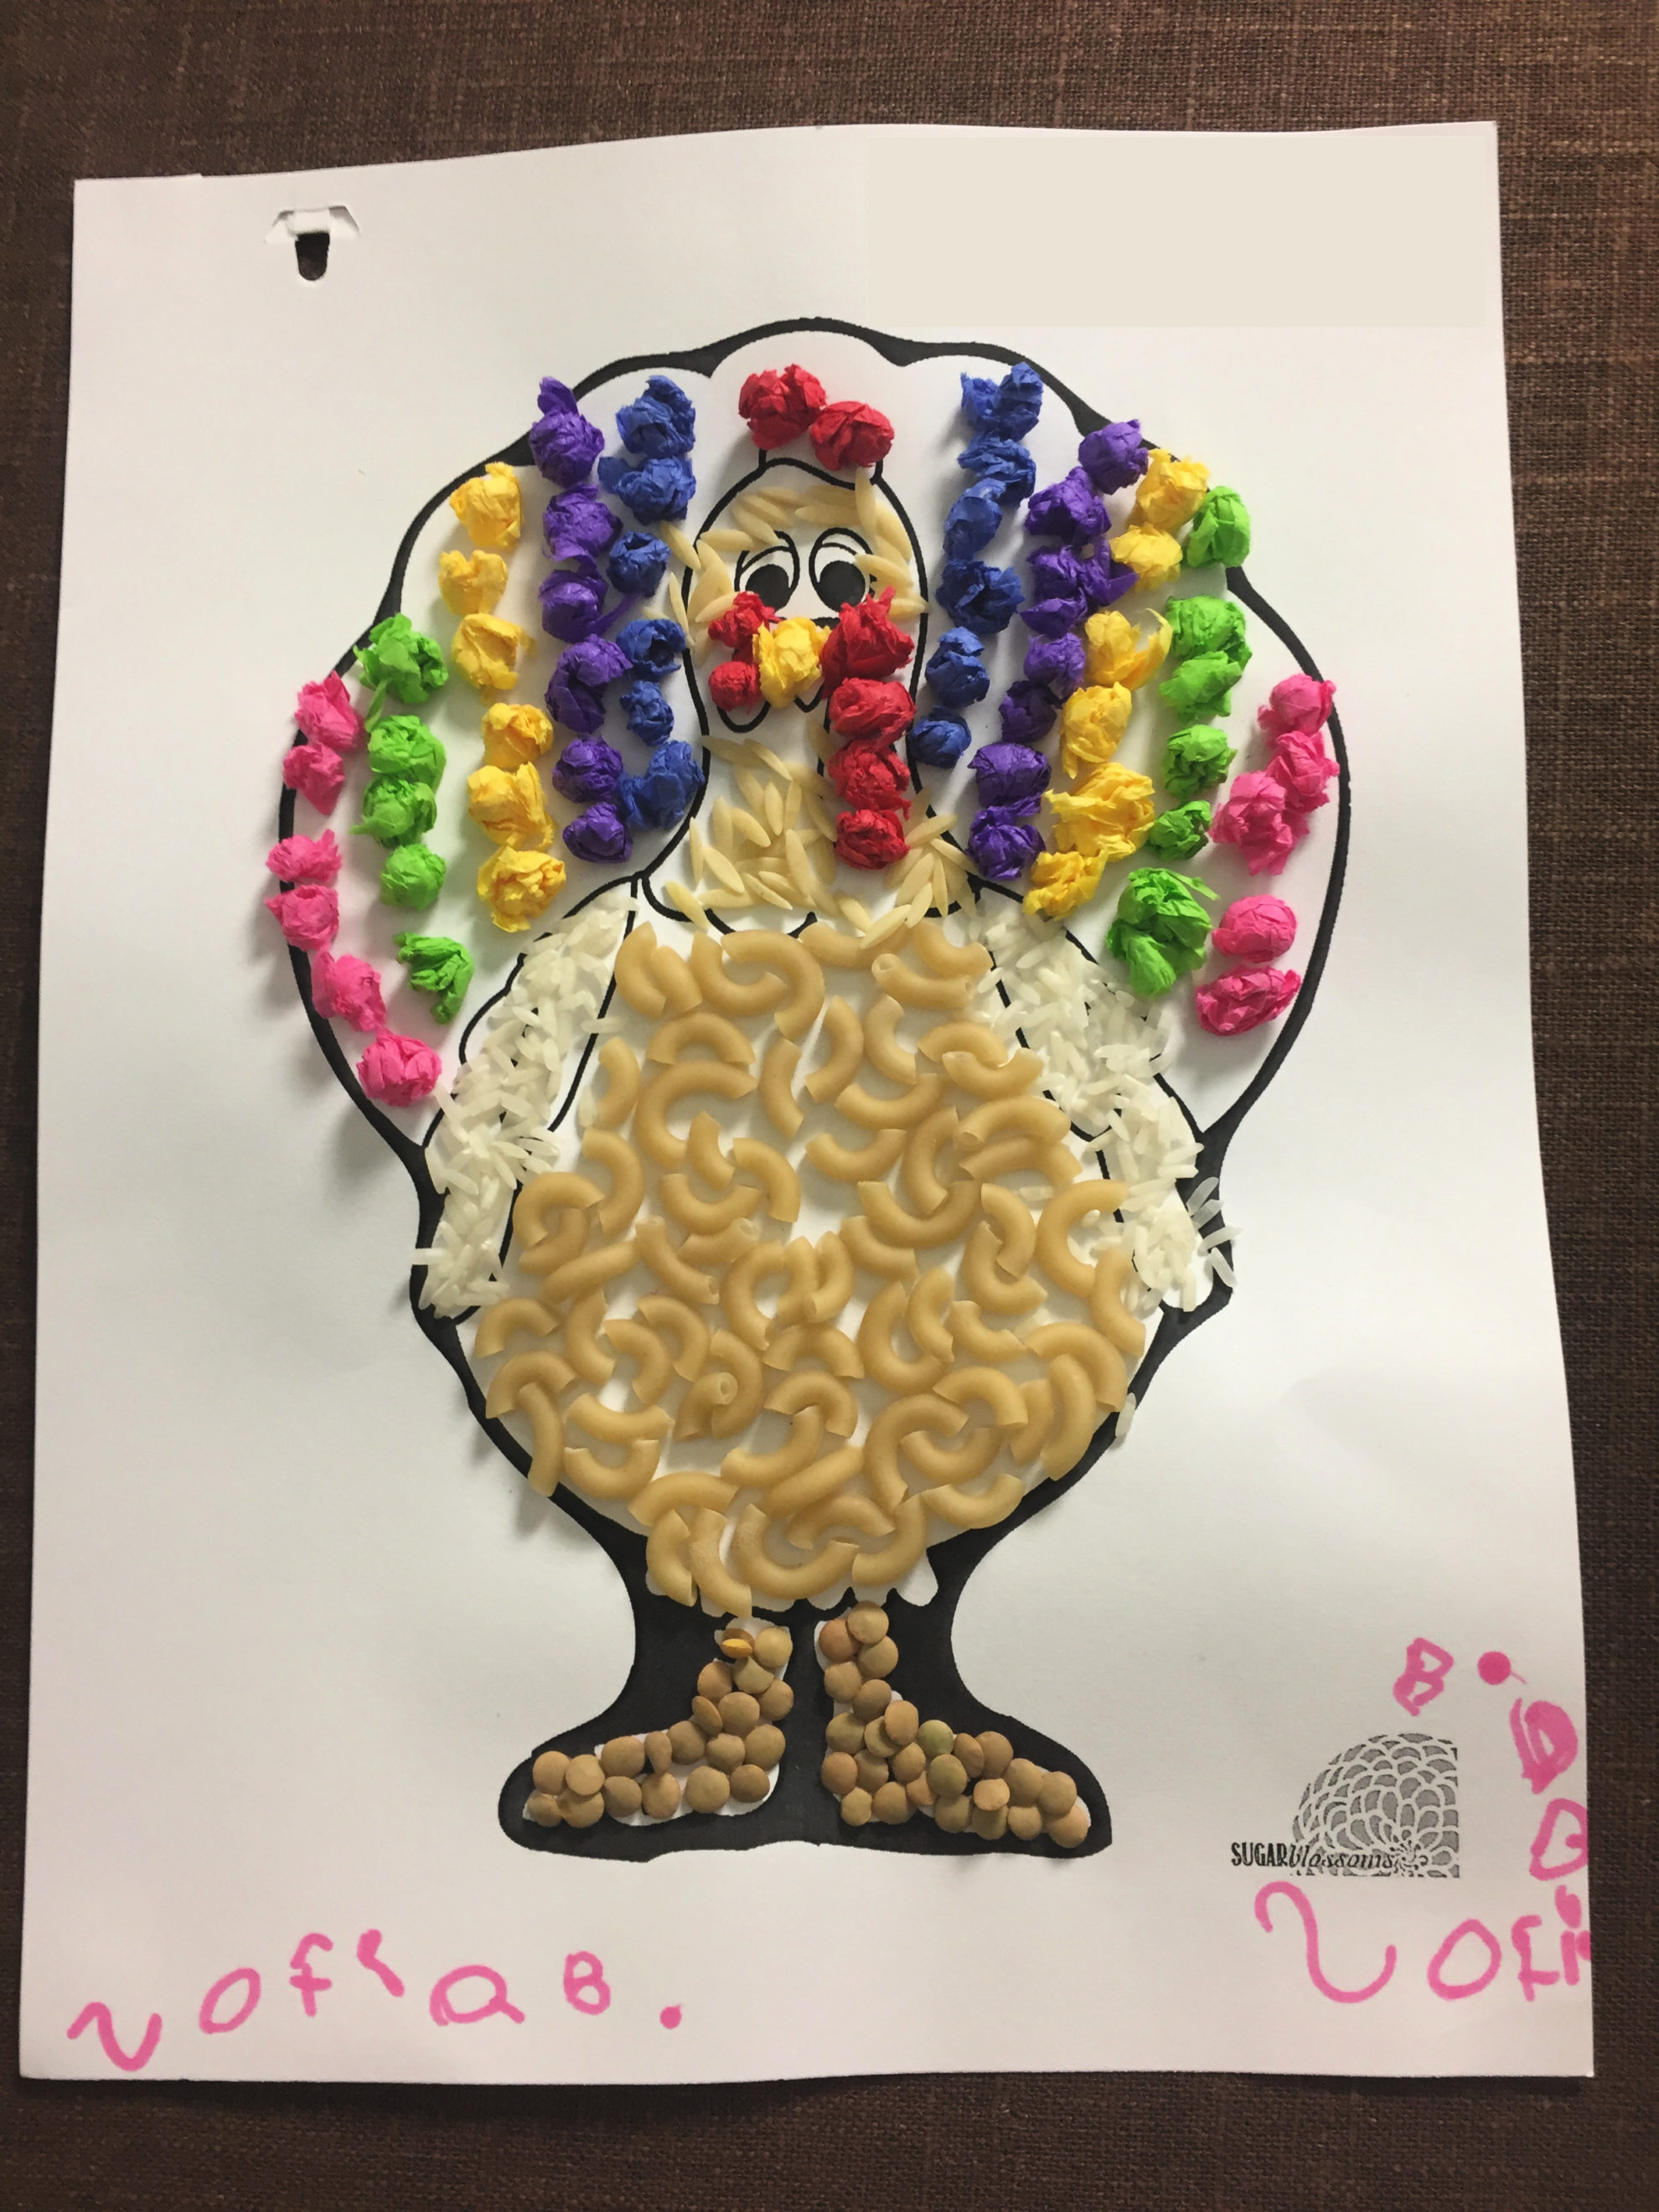 Paper Turkey In Disguise with macaroni noodles nad rice glued to it with little tissue paper balls made into a Rainbow.